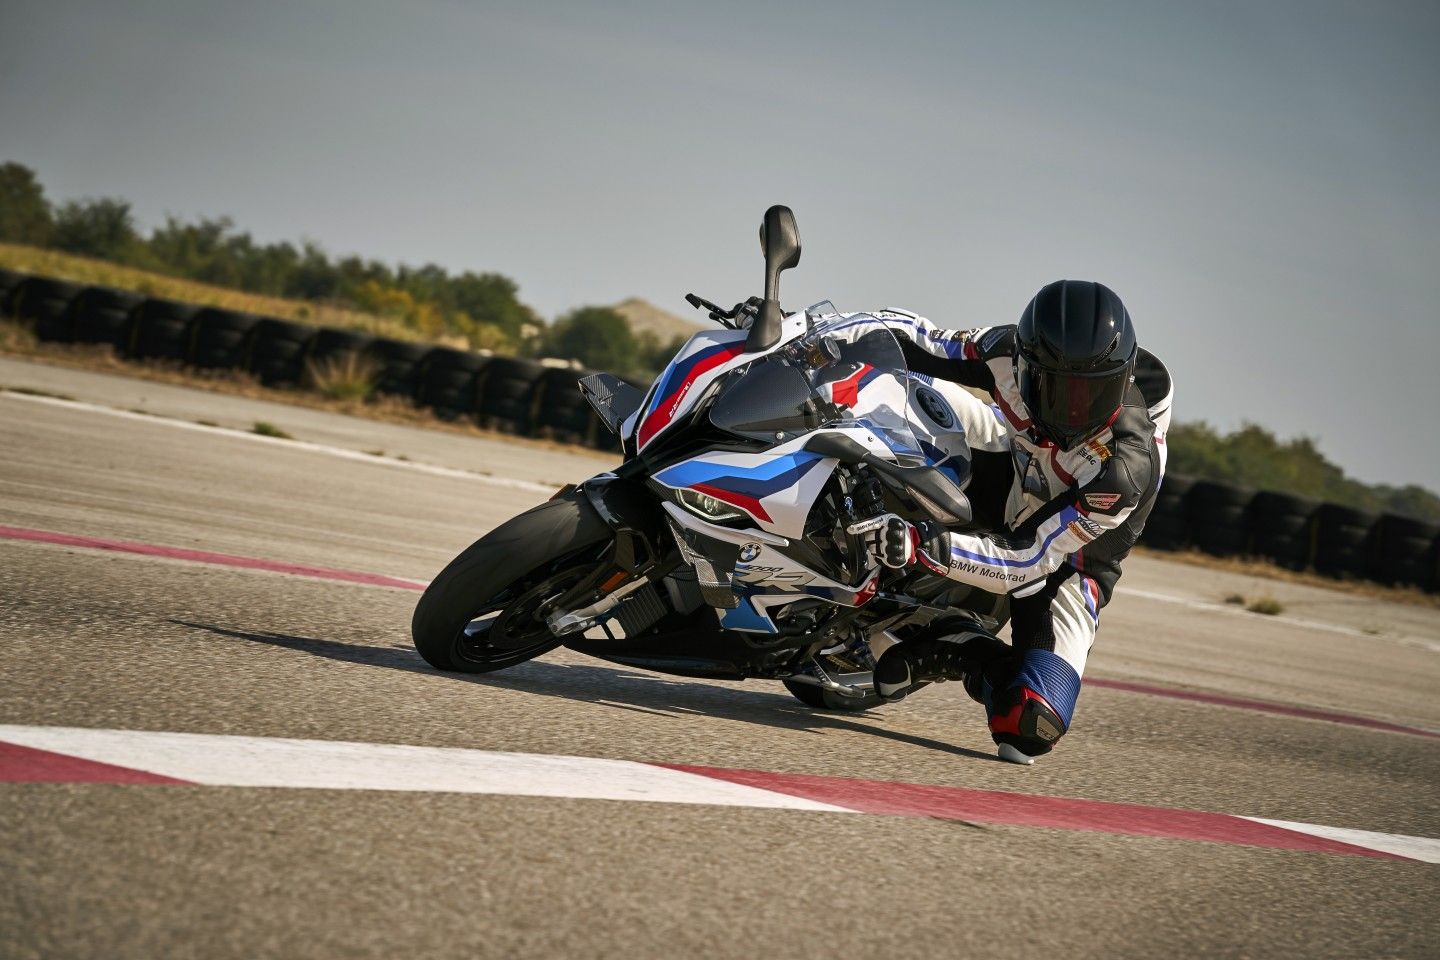 BMW Releases Its First M Series Motorcycle, The Extraordinary M1000RR